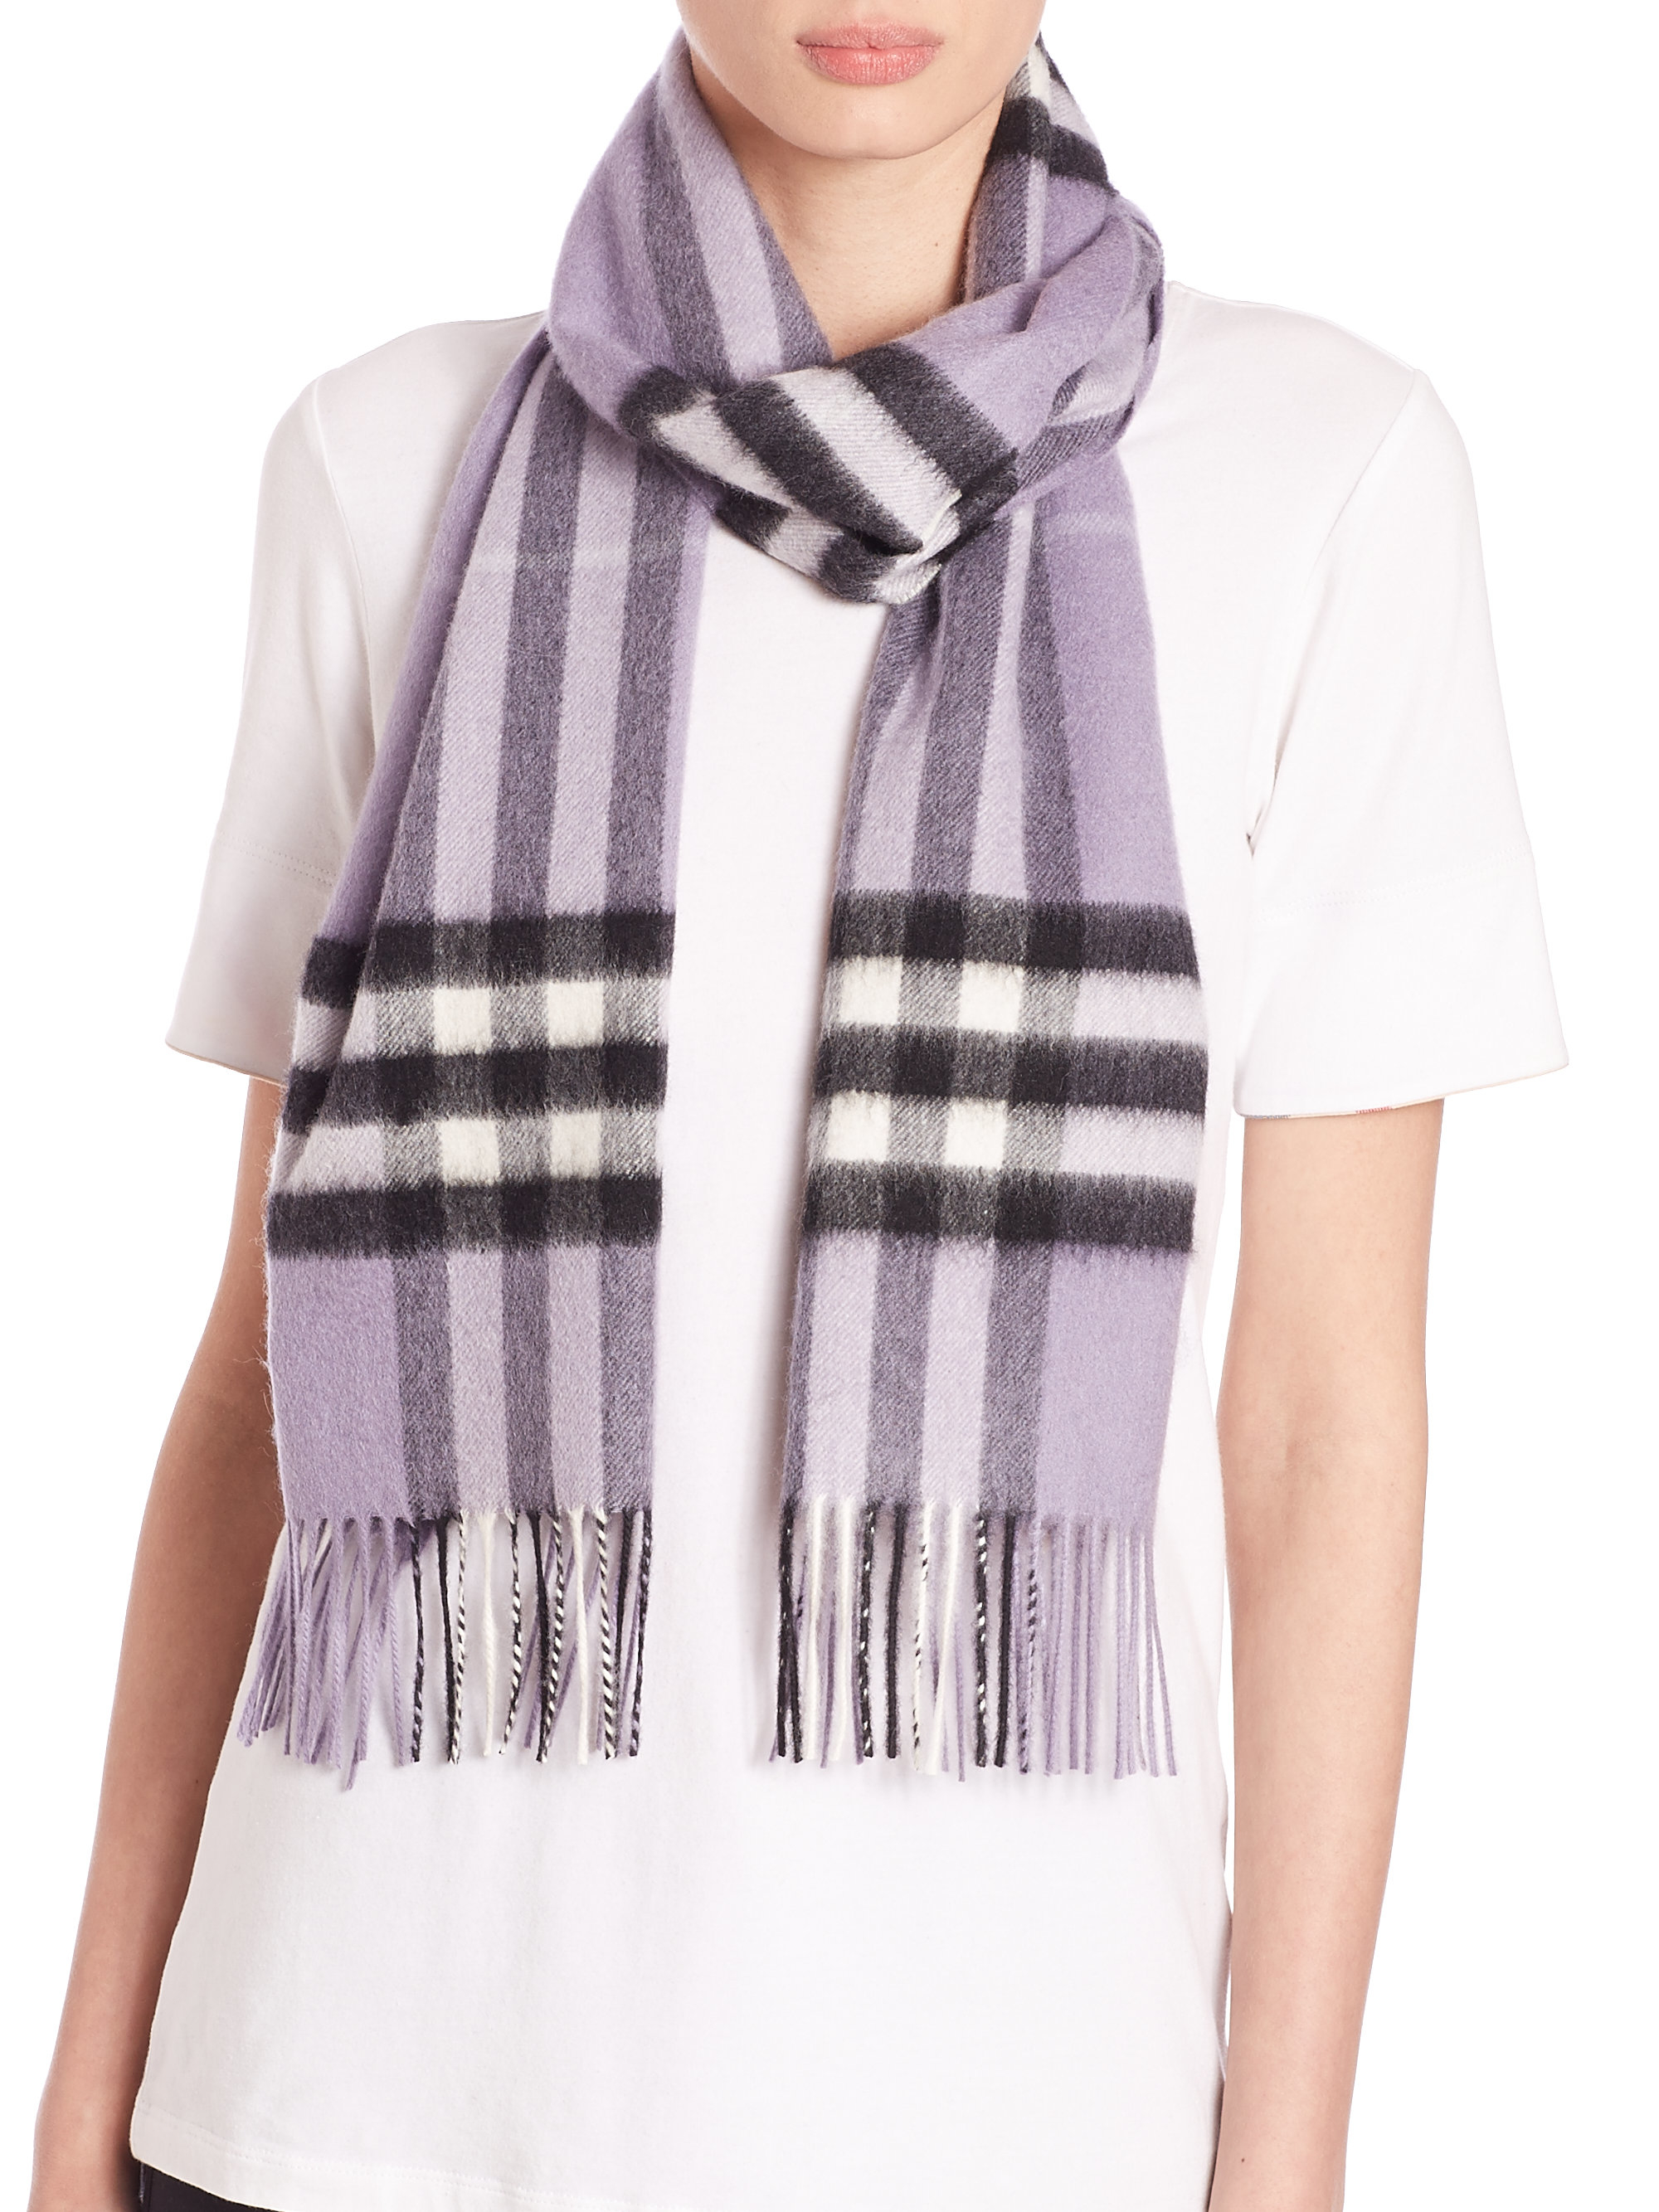 Burberry Giant Check Cashmere Scarf in Purple | Lyst